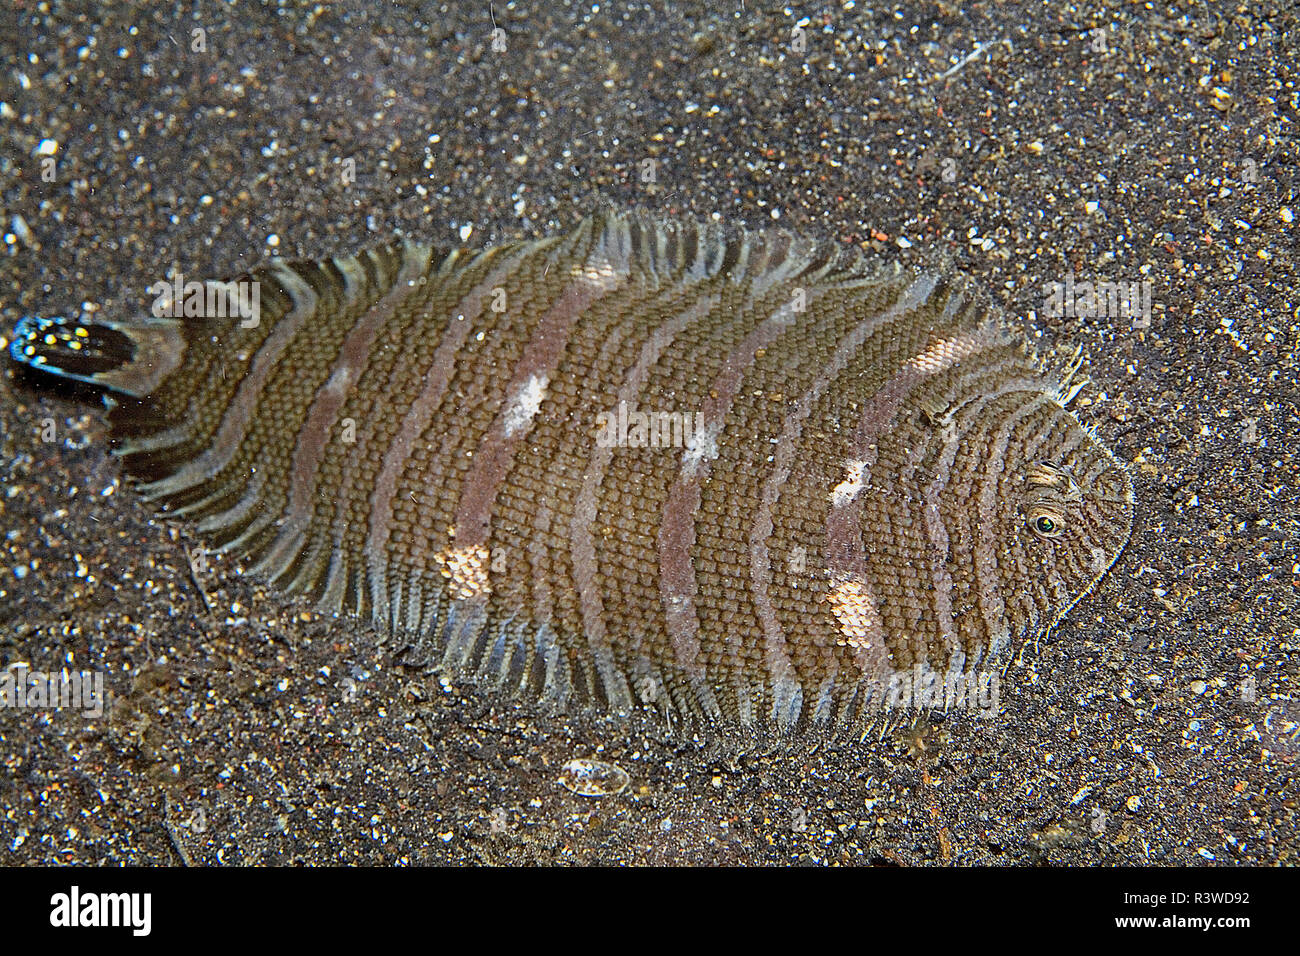 Spotted tail Sole or Banded sole (Zebrias fasciatus), laying on sand, Sulawesi, Indonesia Stock Photo